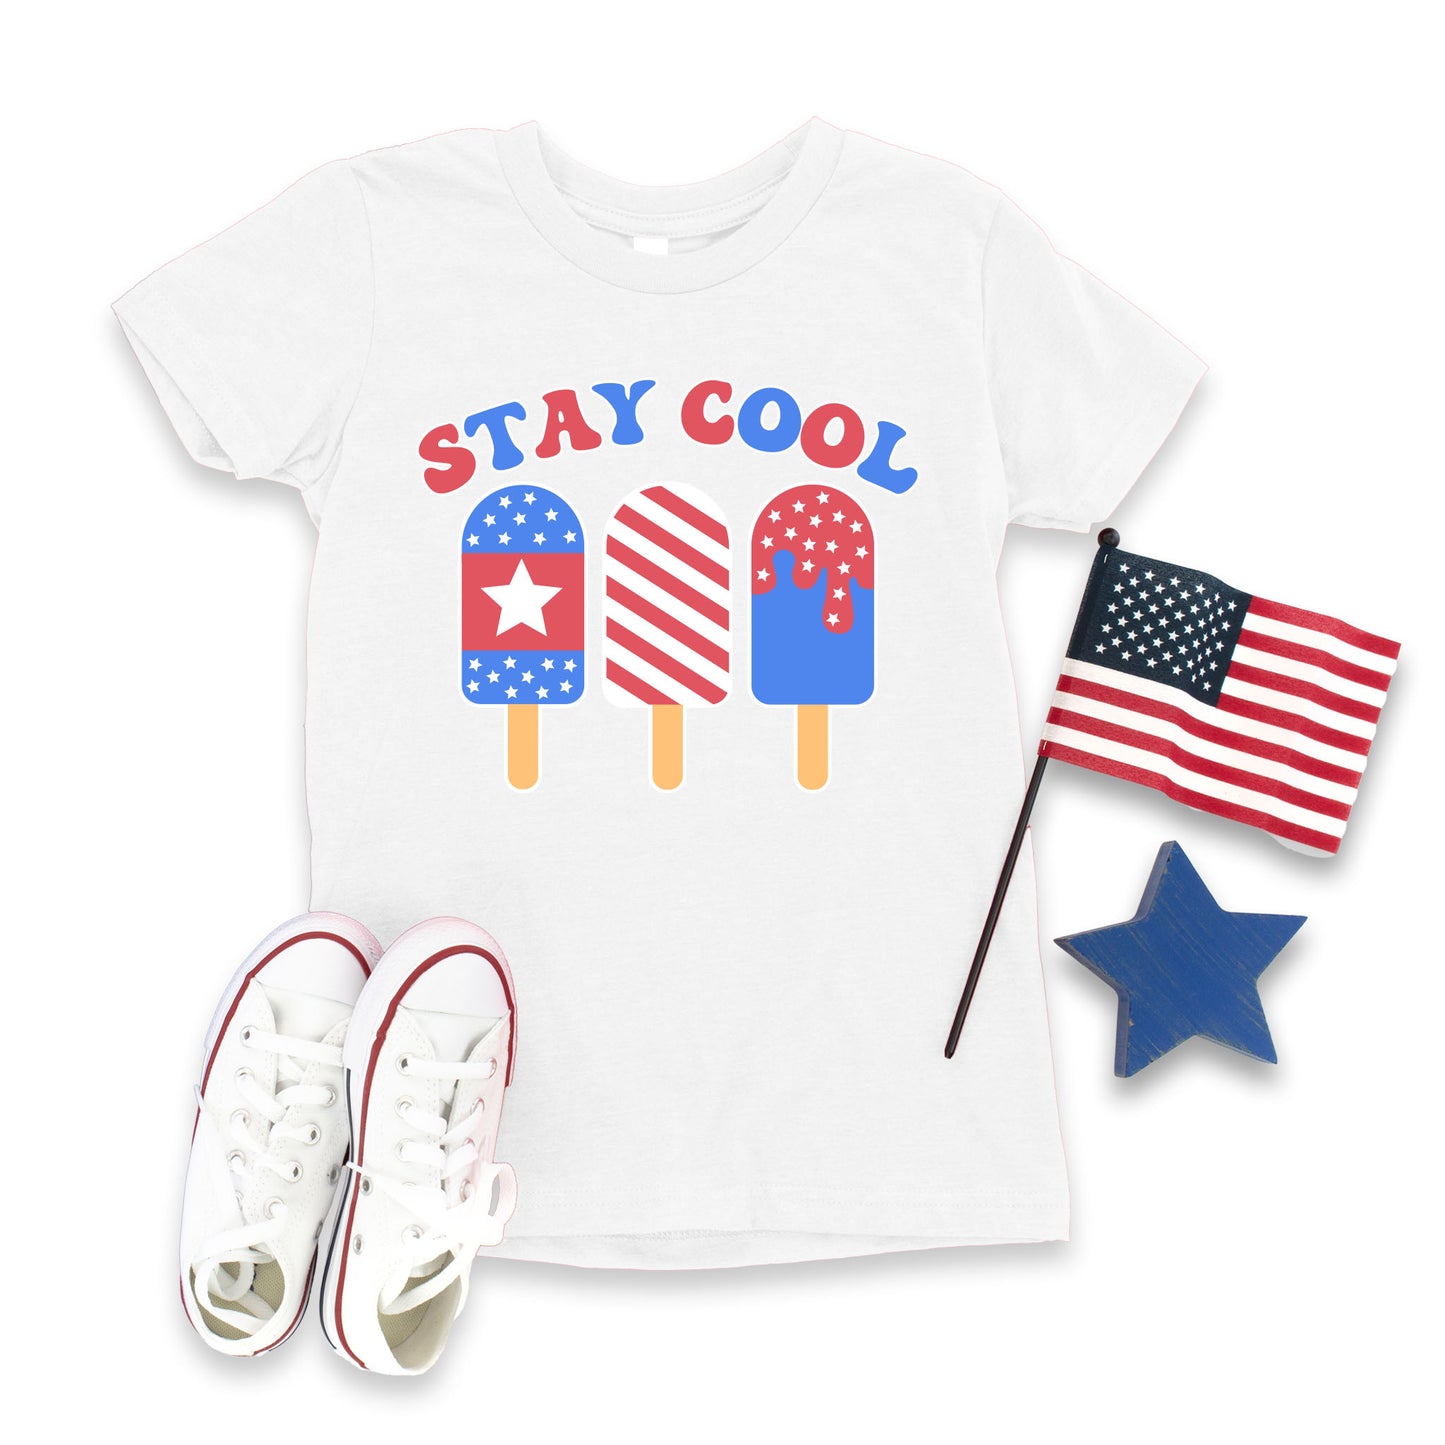 "Stay Cool" - White T-shirt (Youth Only)